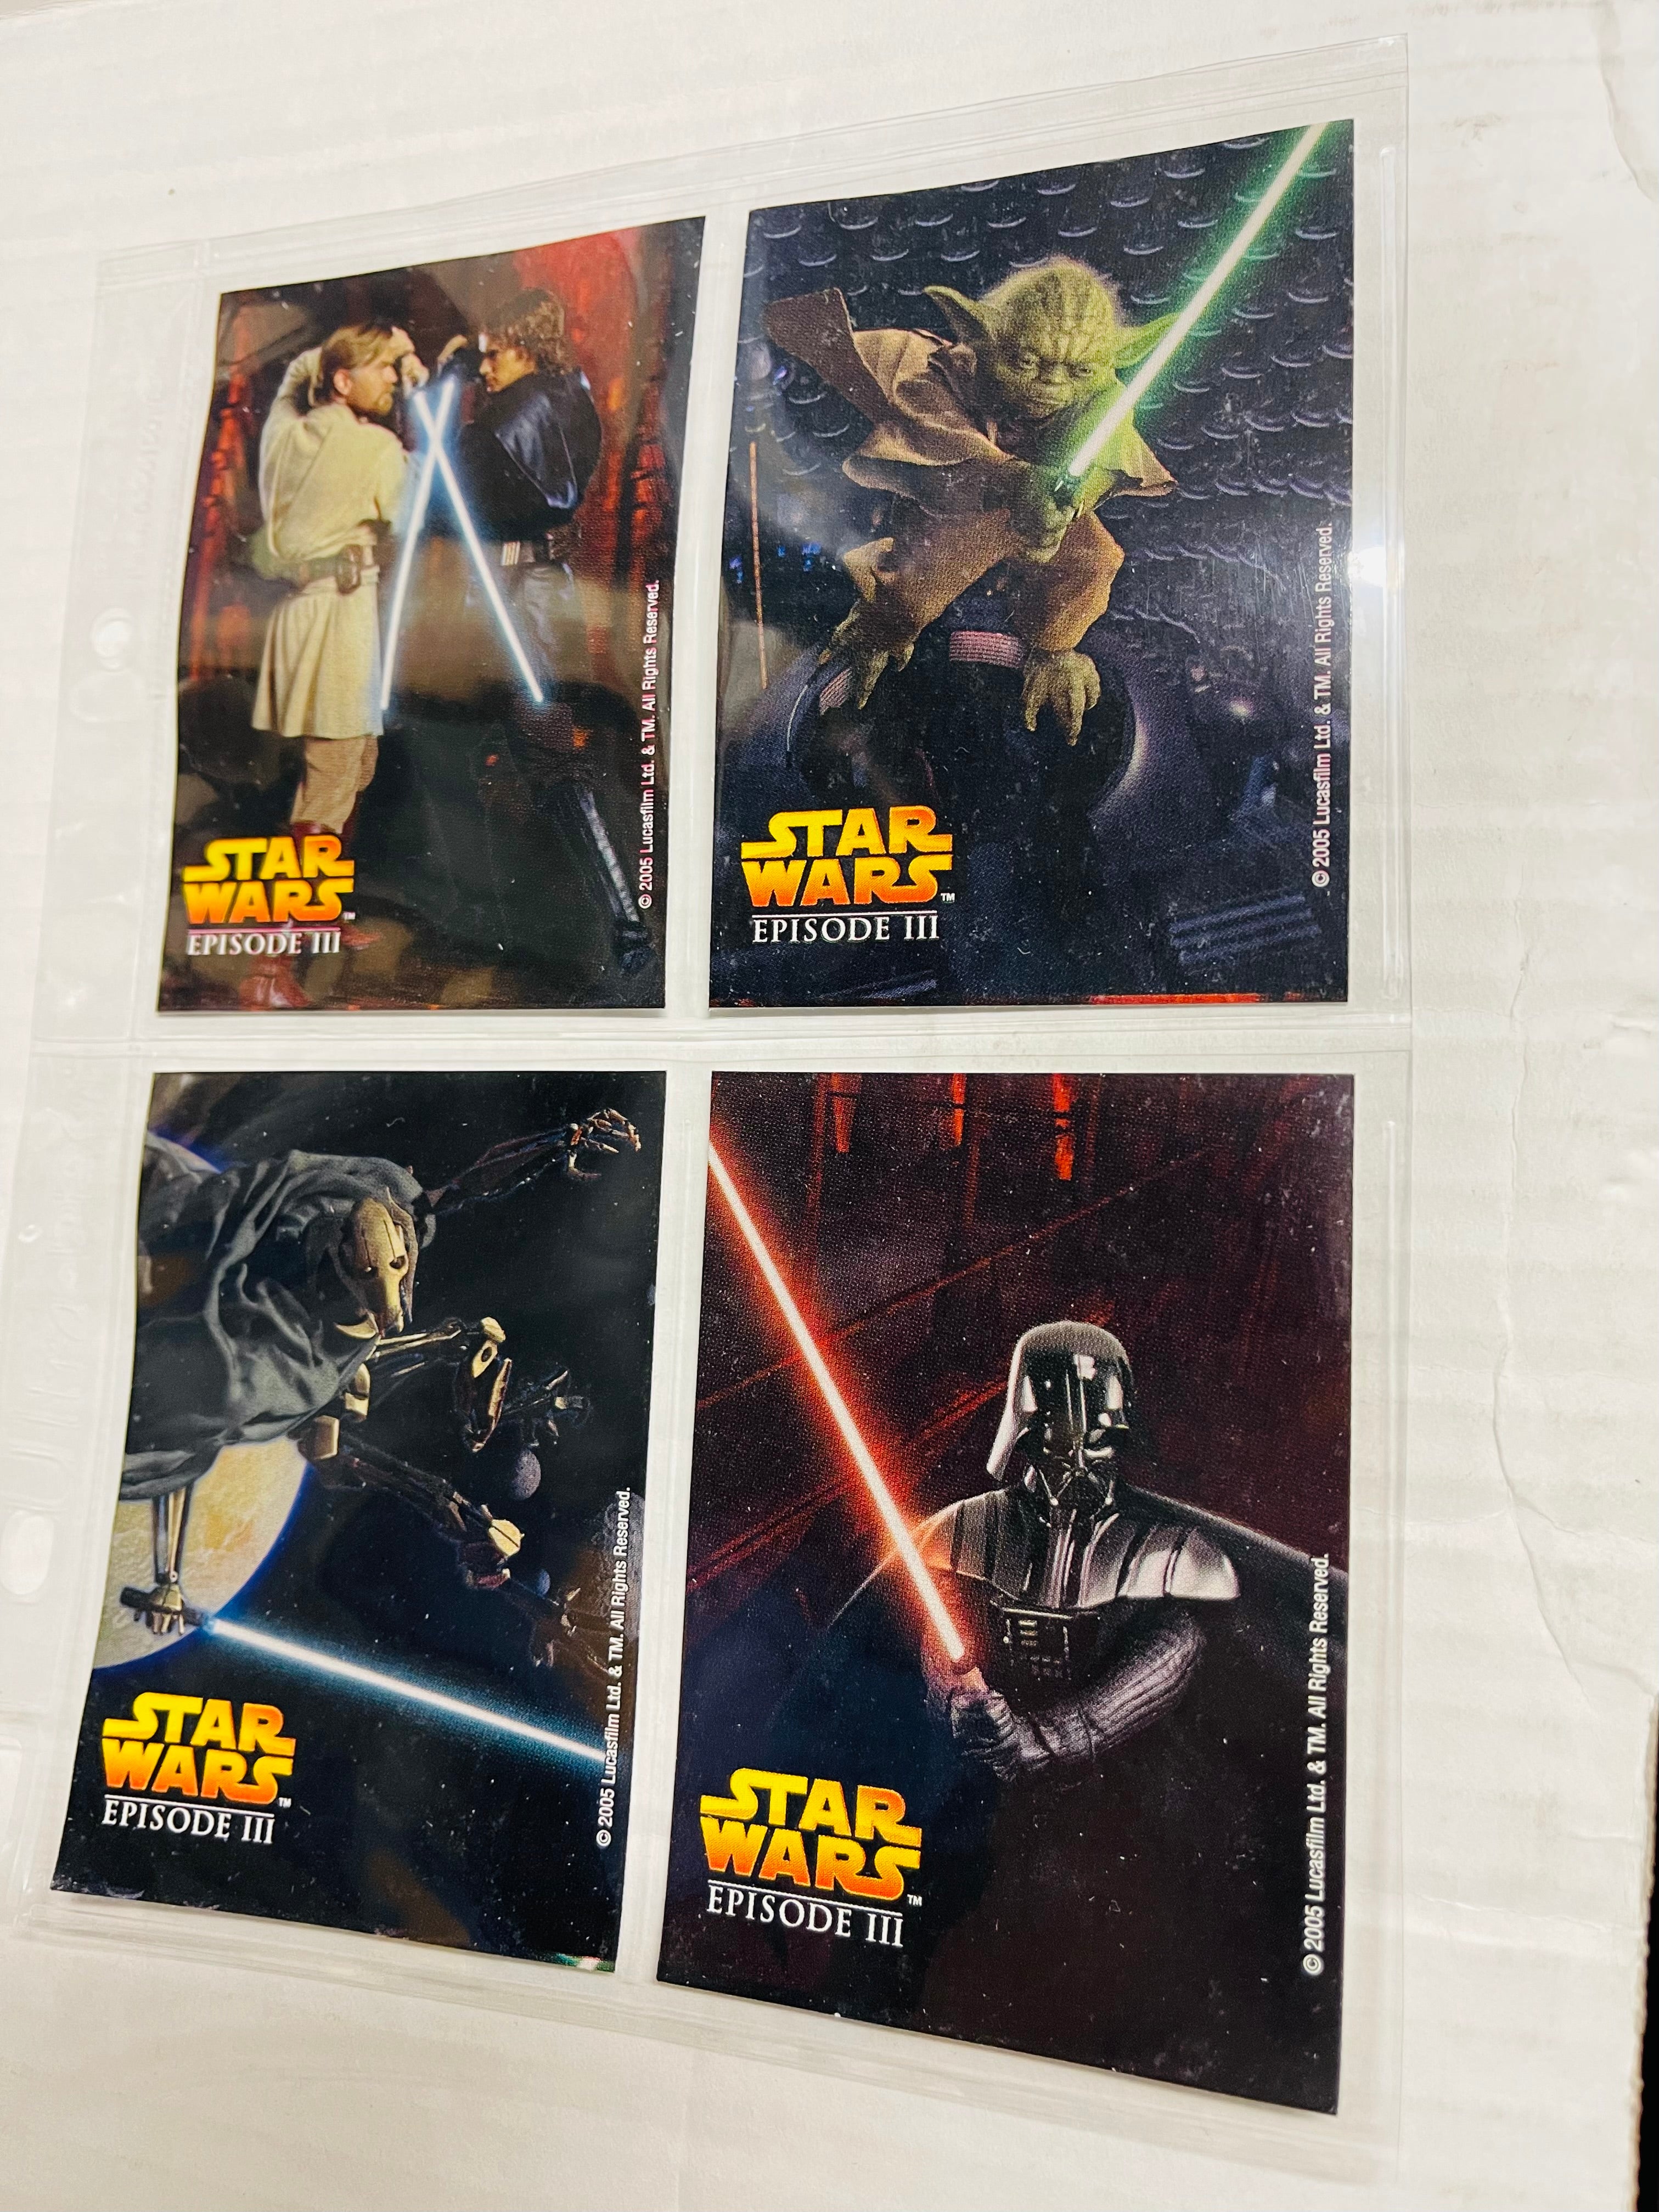 Star Wars Episode 3 rare 4 stickers set by Energizer batteries 2005